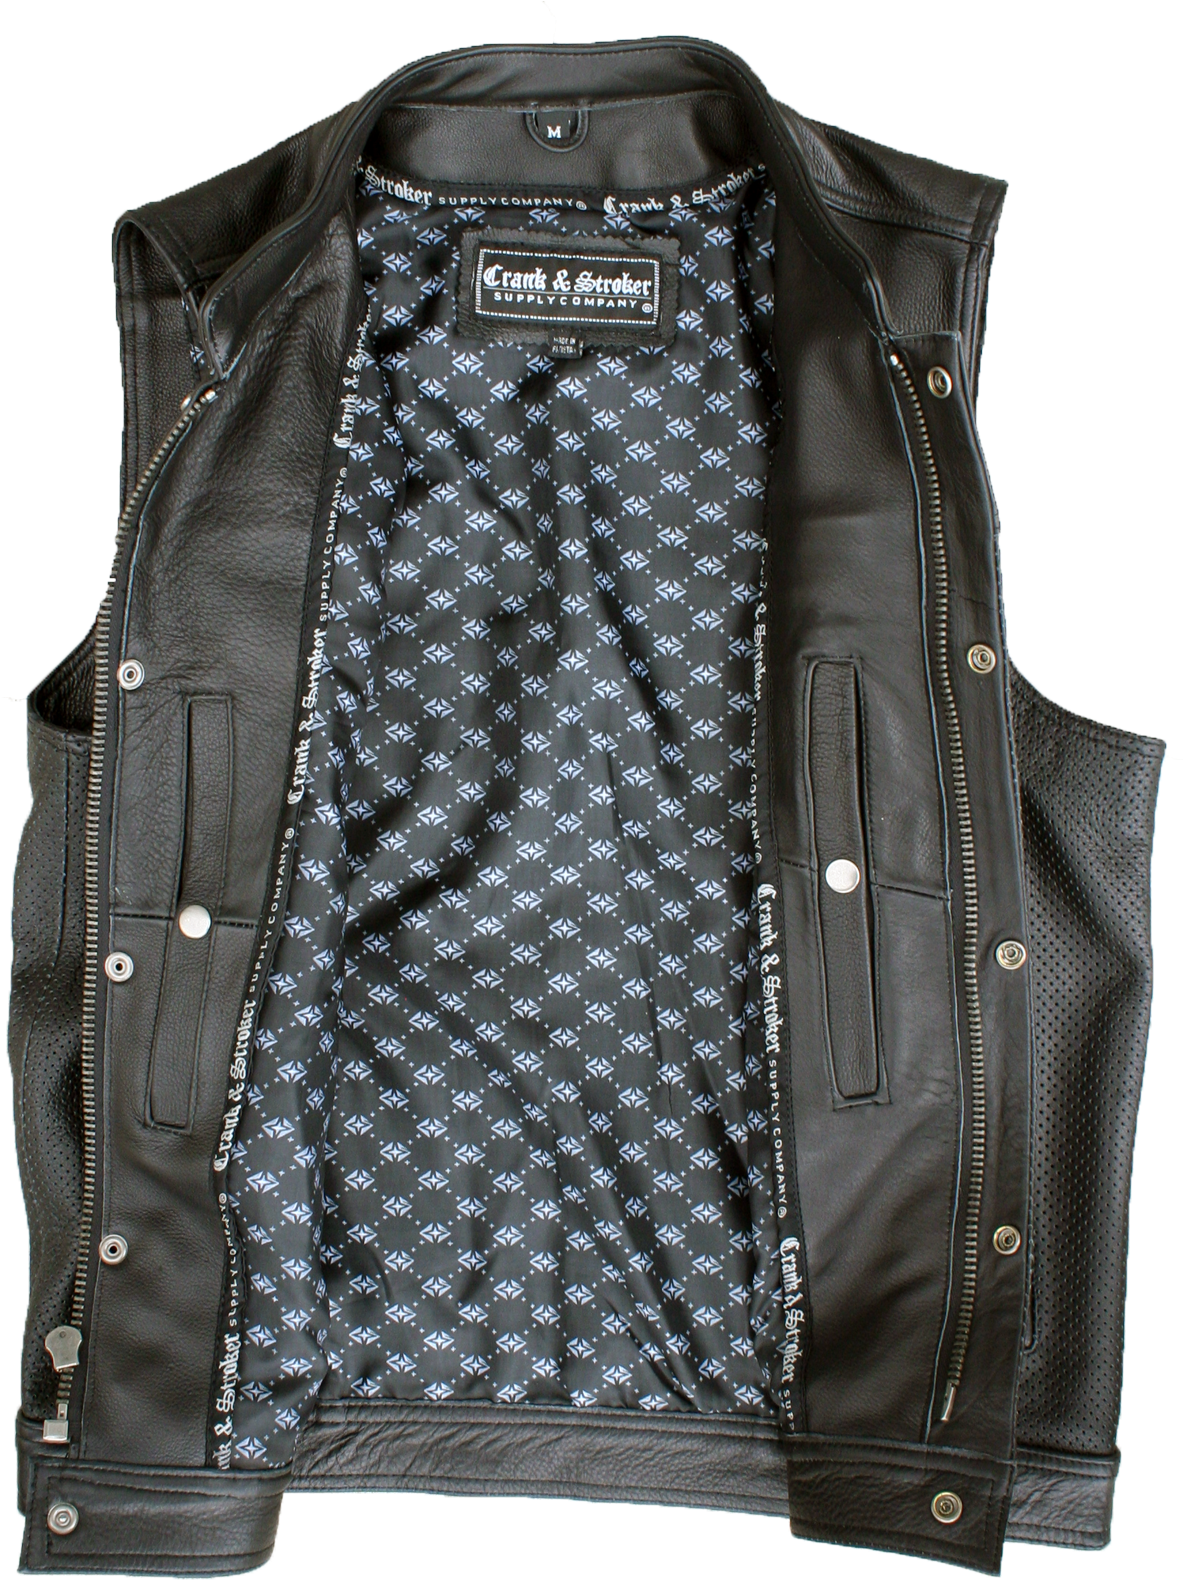 Perforated Leather Vest Open - Leather Vest Open (1200x1600), Png Download